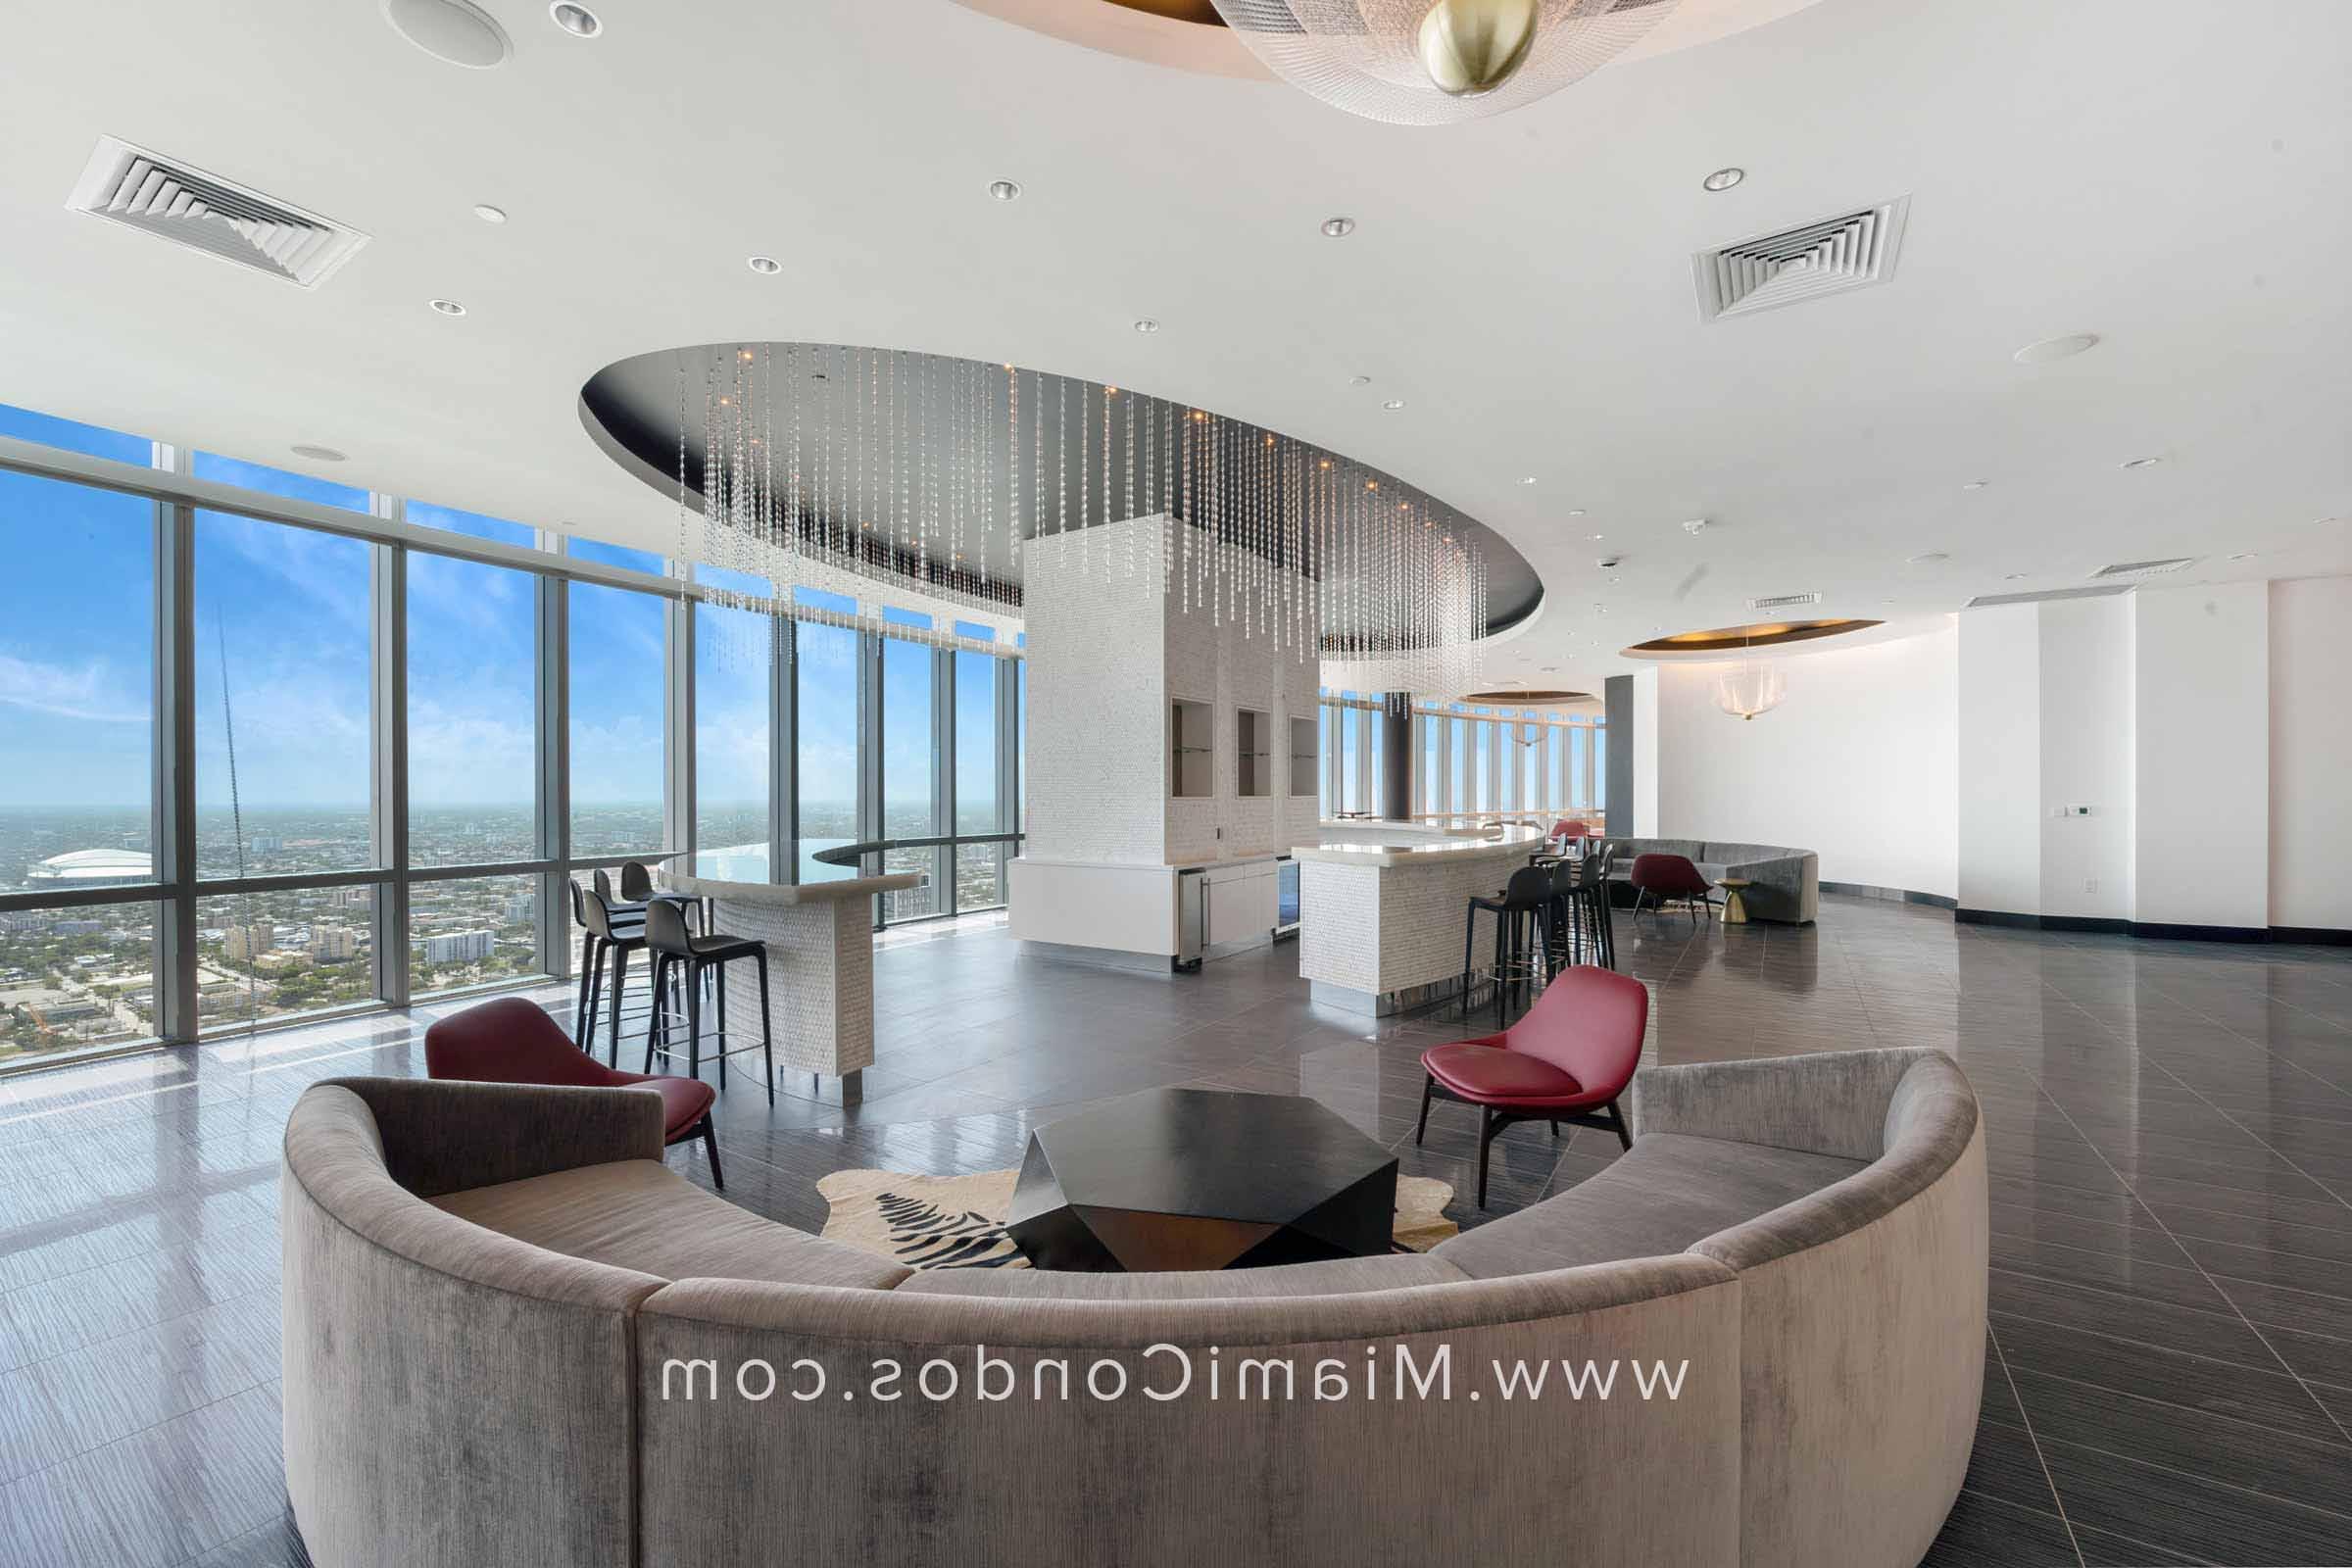 Paramount Miami Worldcenter Rooftop Lounge